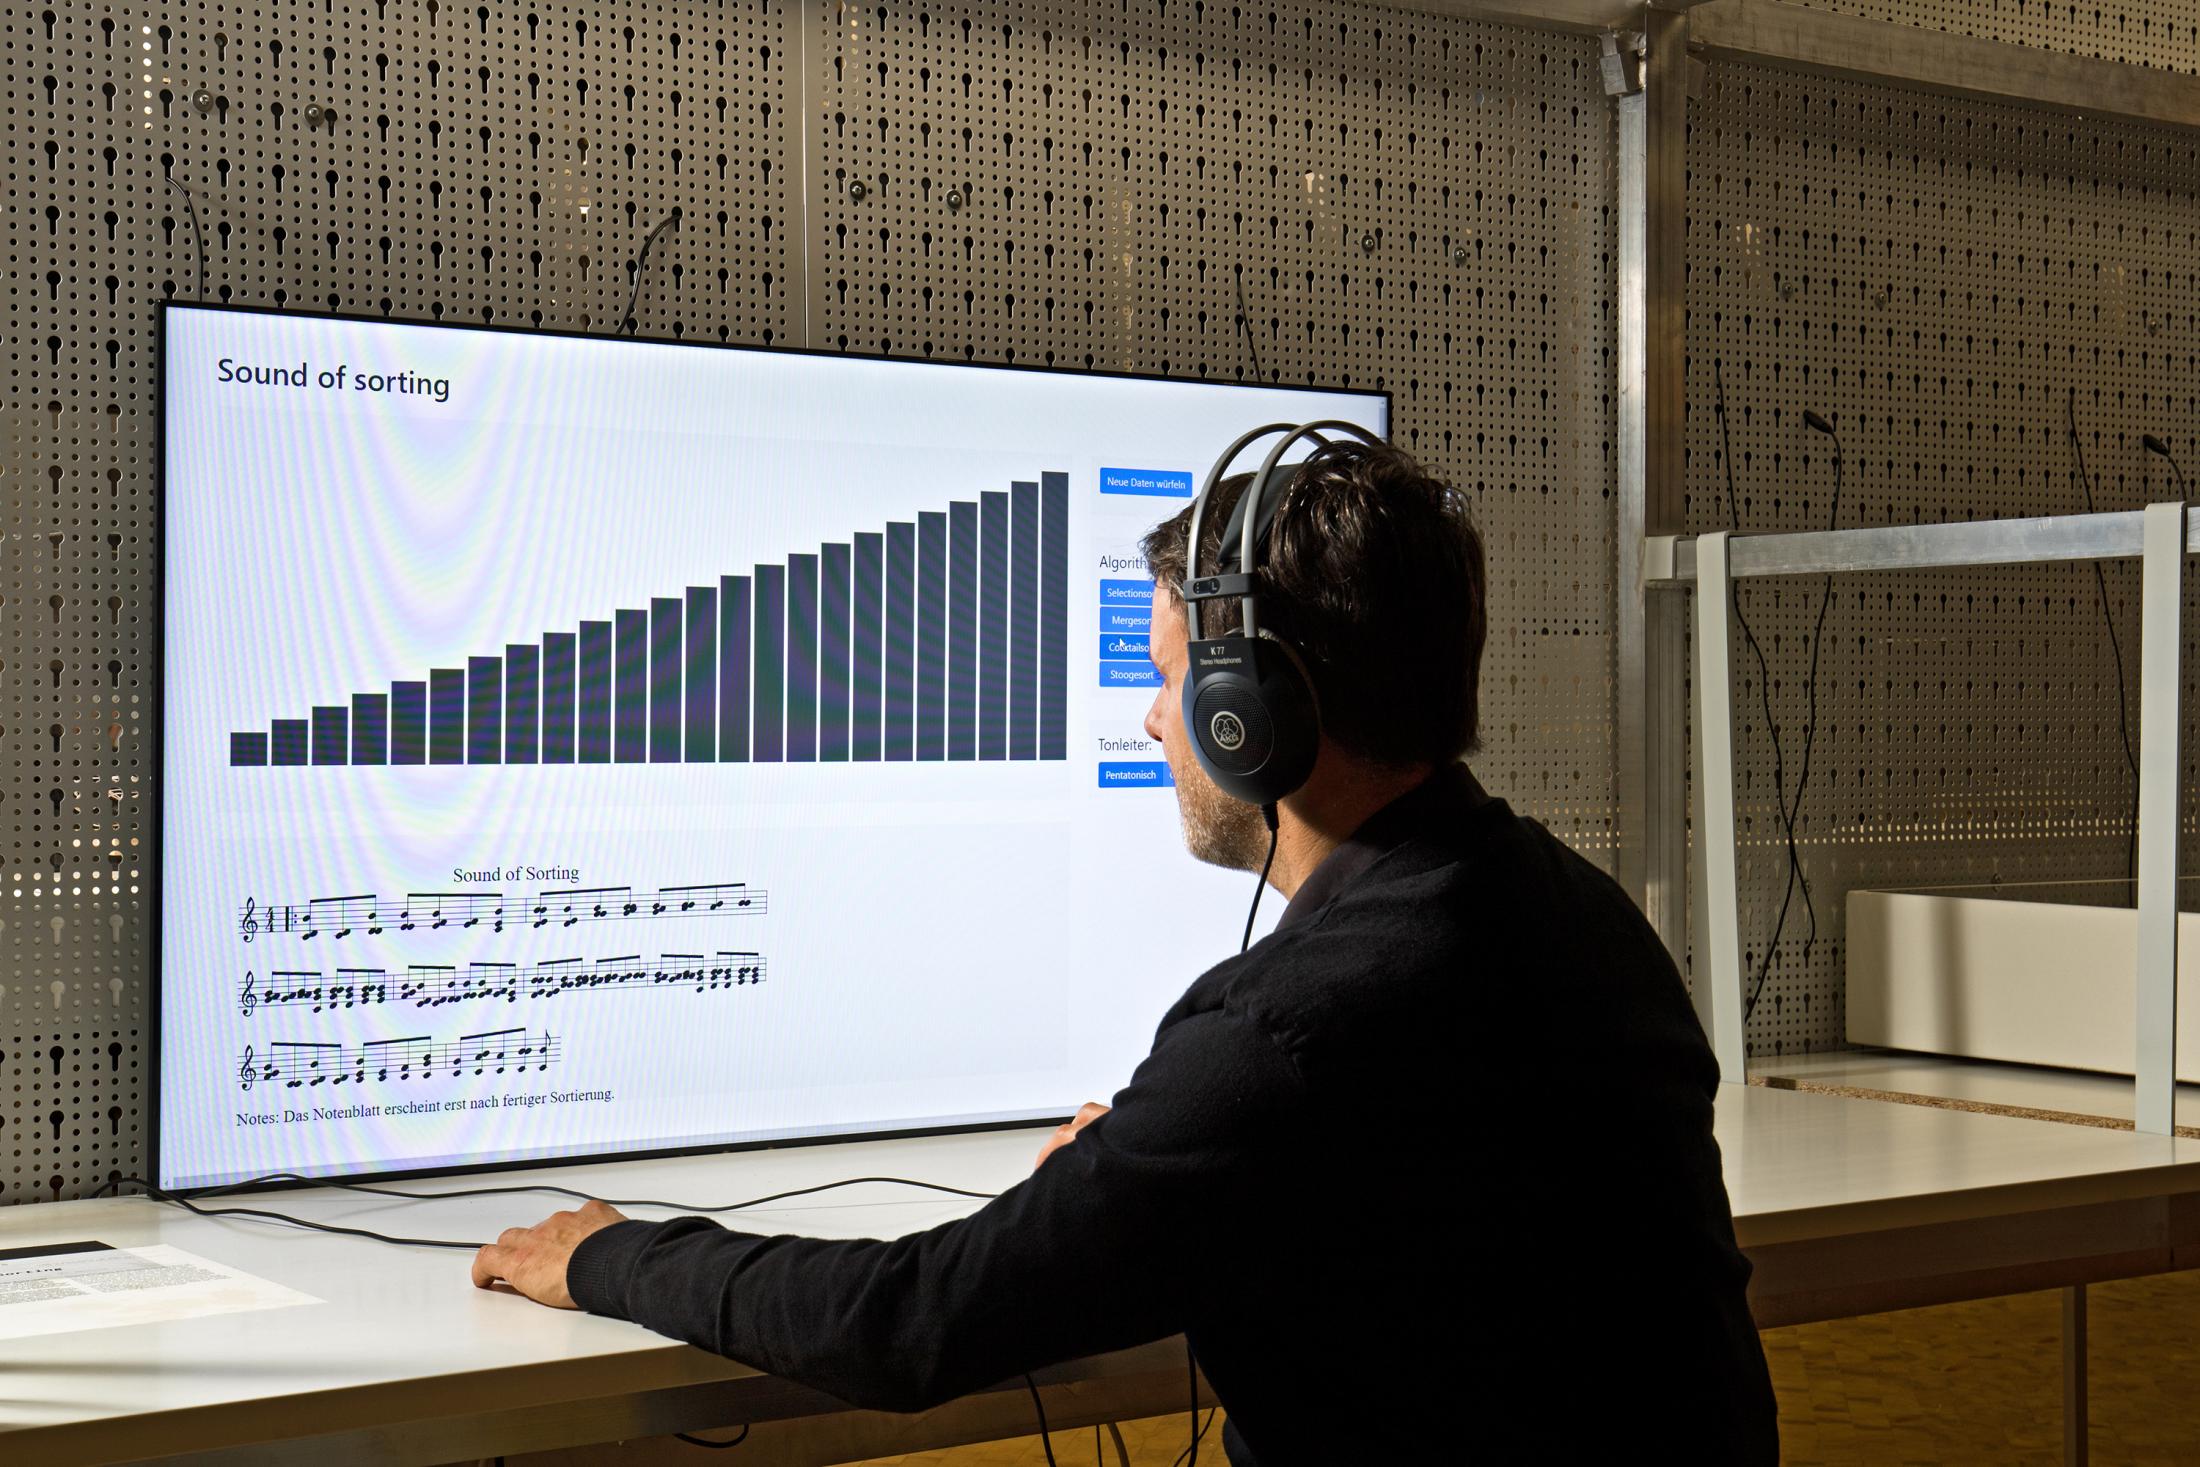 The picture shows a sitting man with headphones in front of a large screen with a sound simulation program